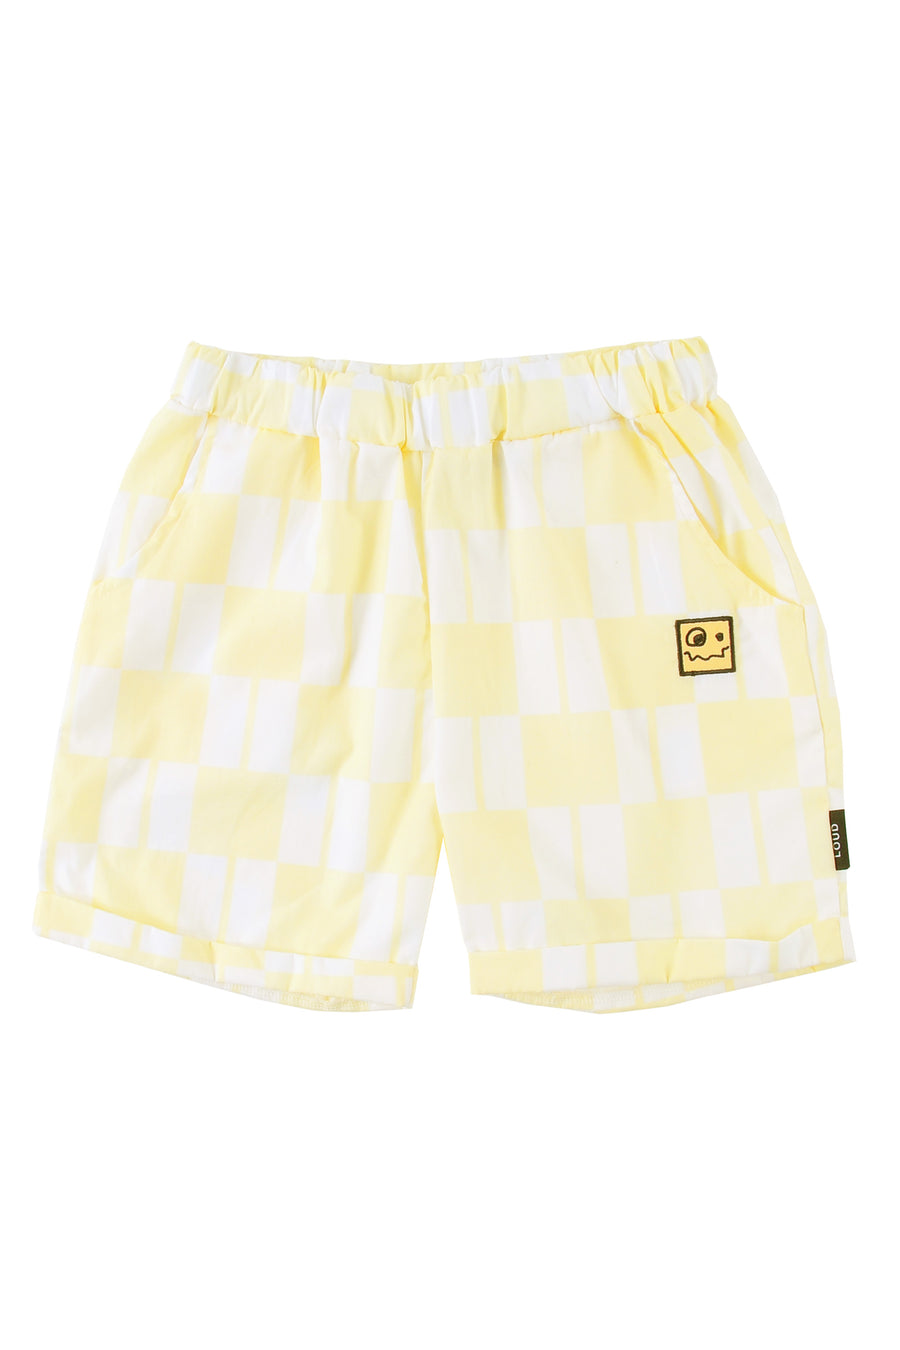 Cycle shorts by Loud